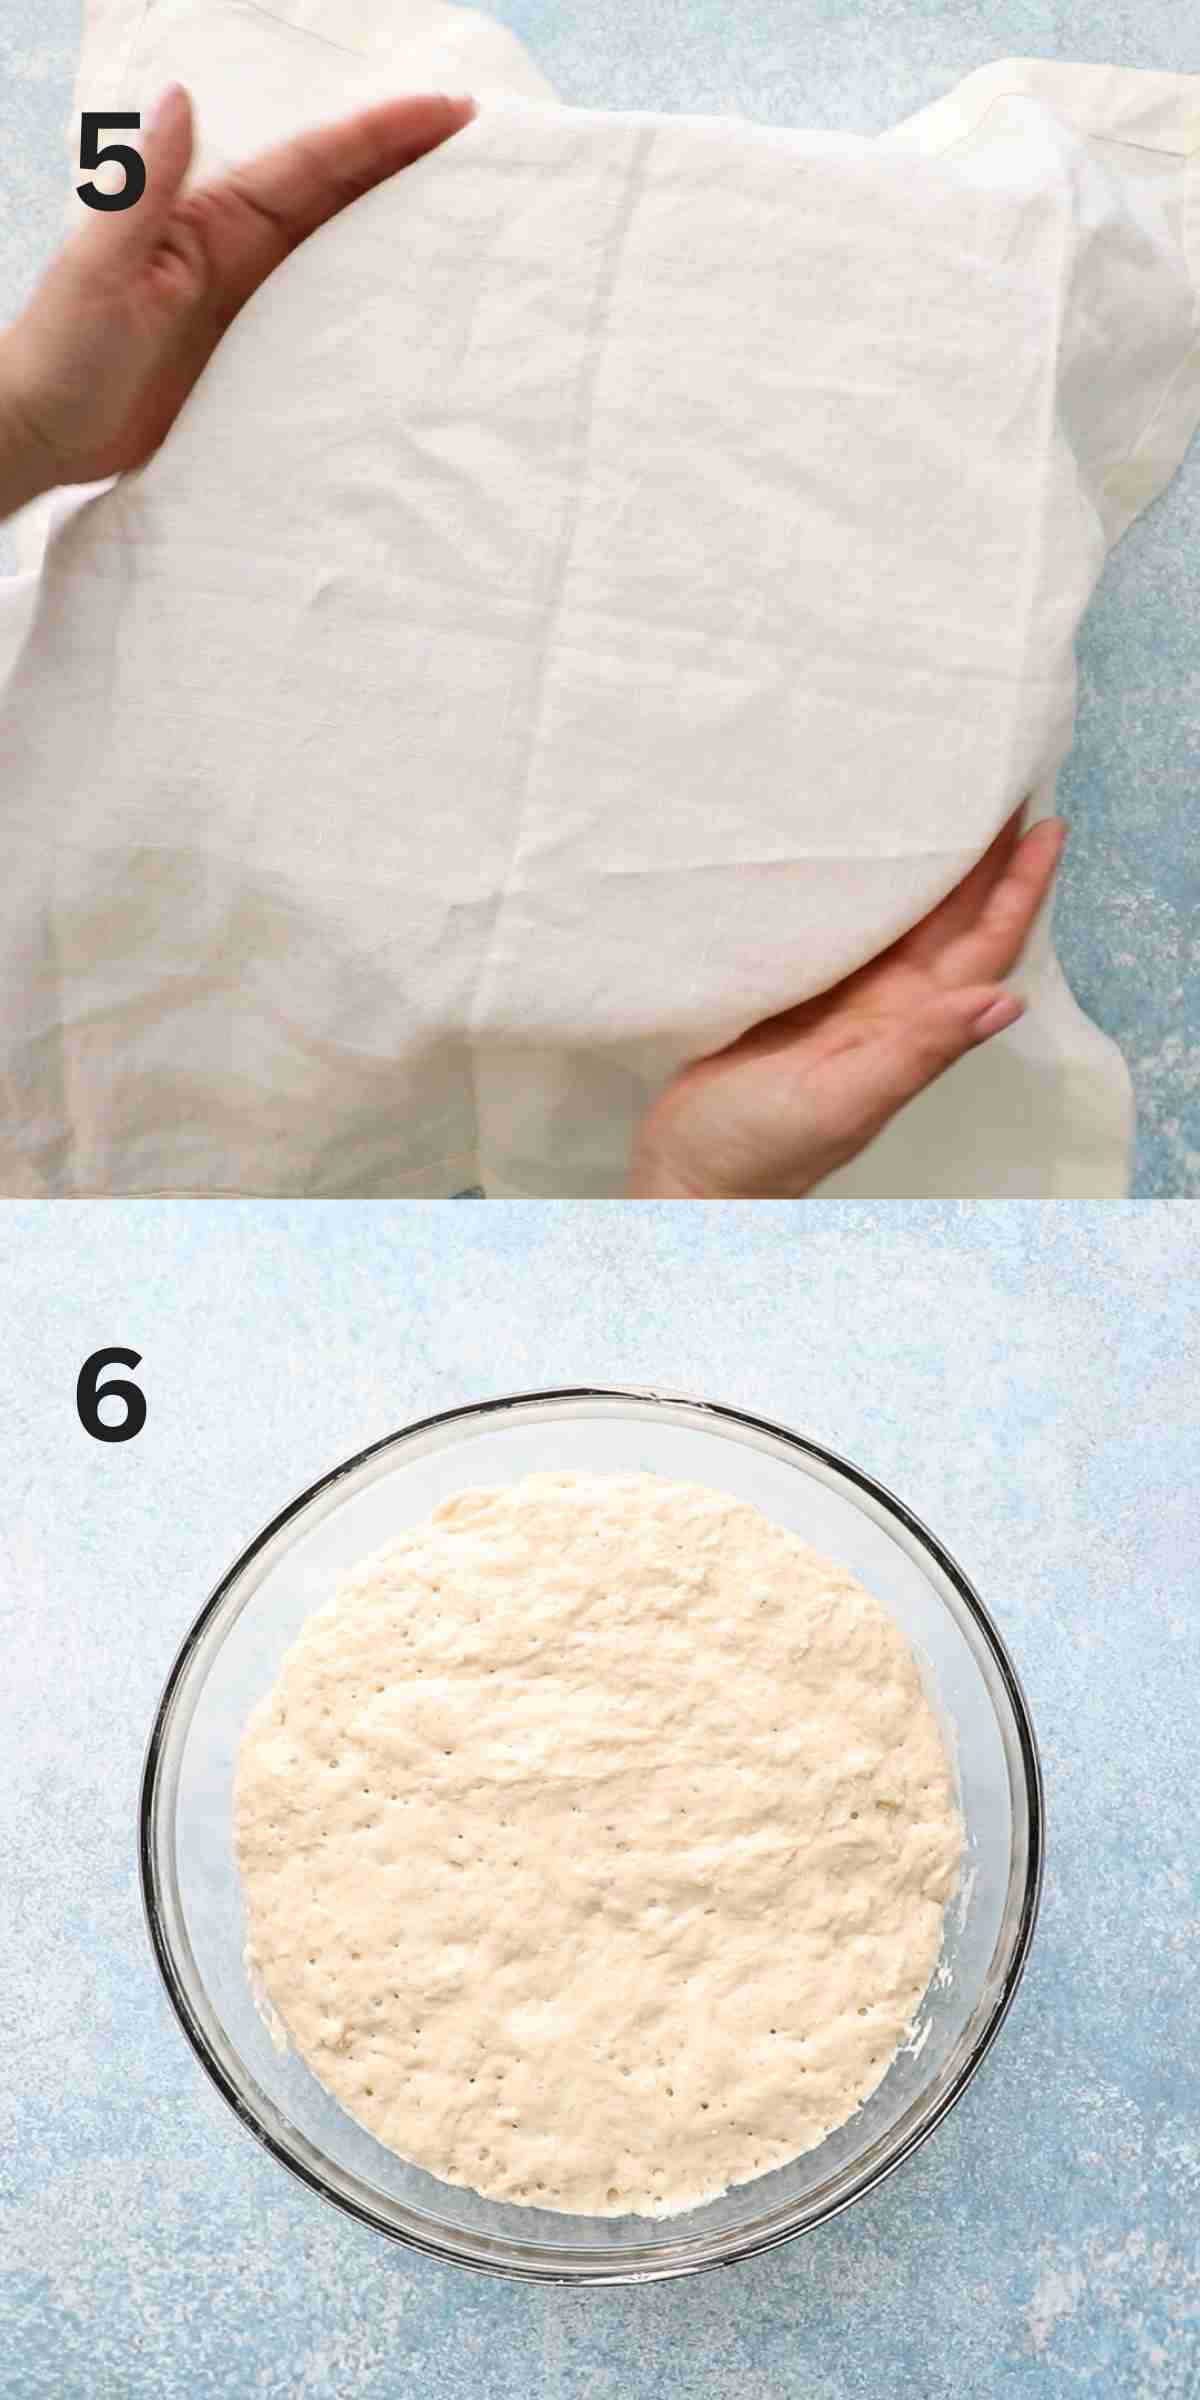 2 photo collage of two hands wrapping a glass bowl of yeast dough with white cloth.